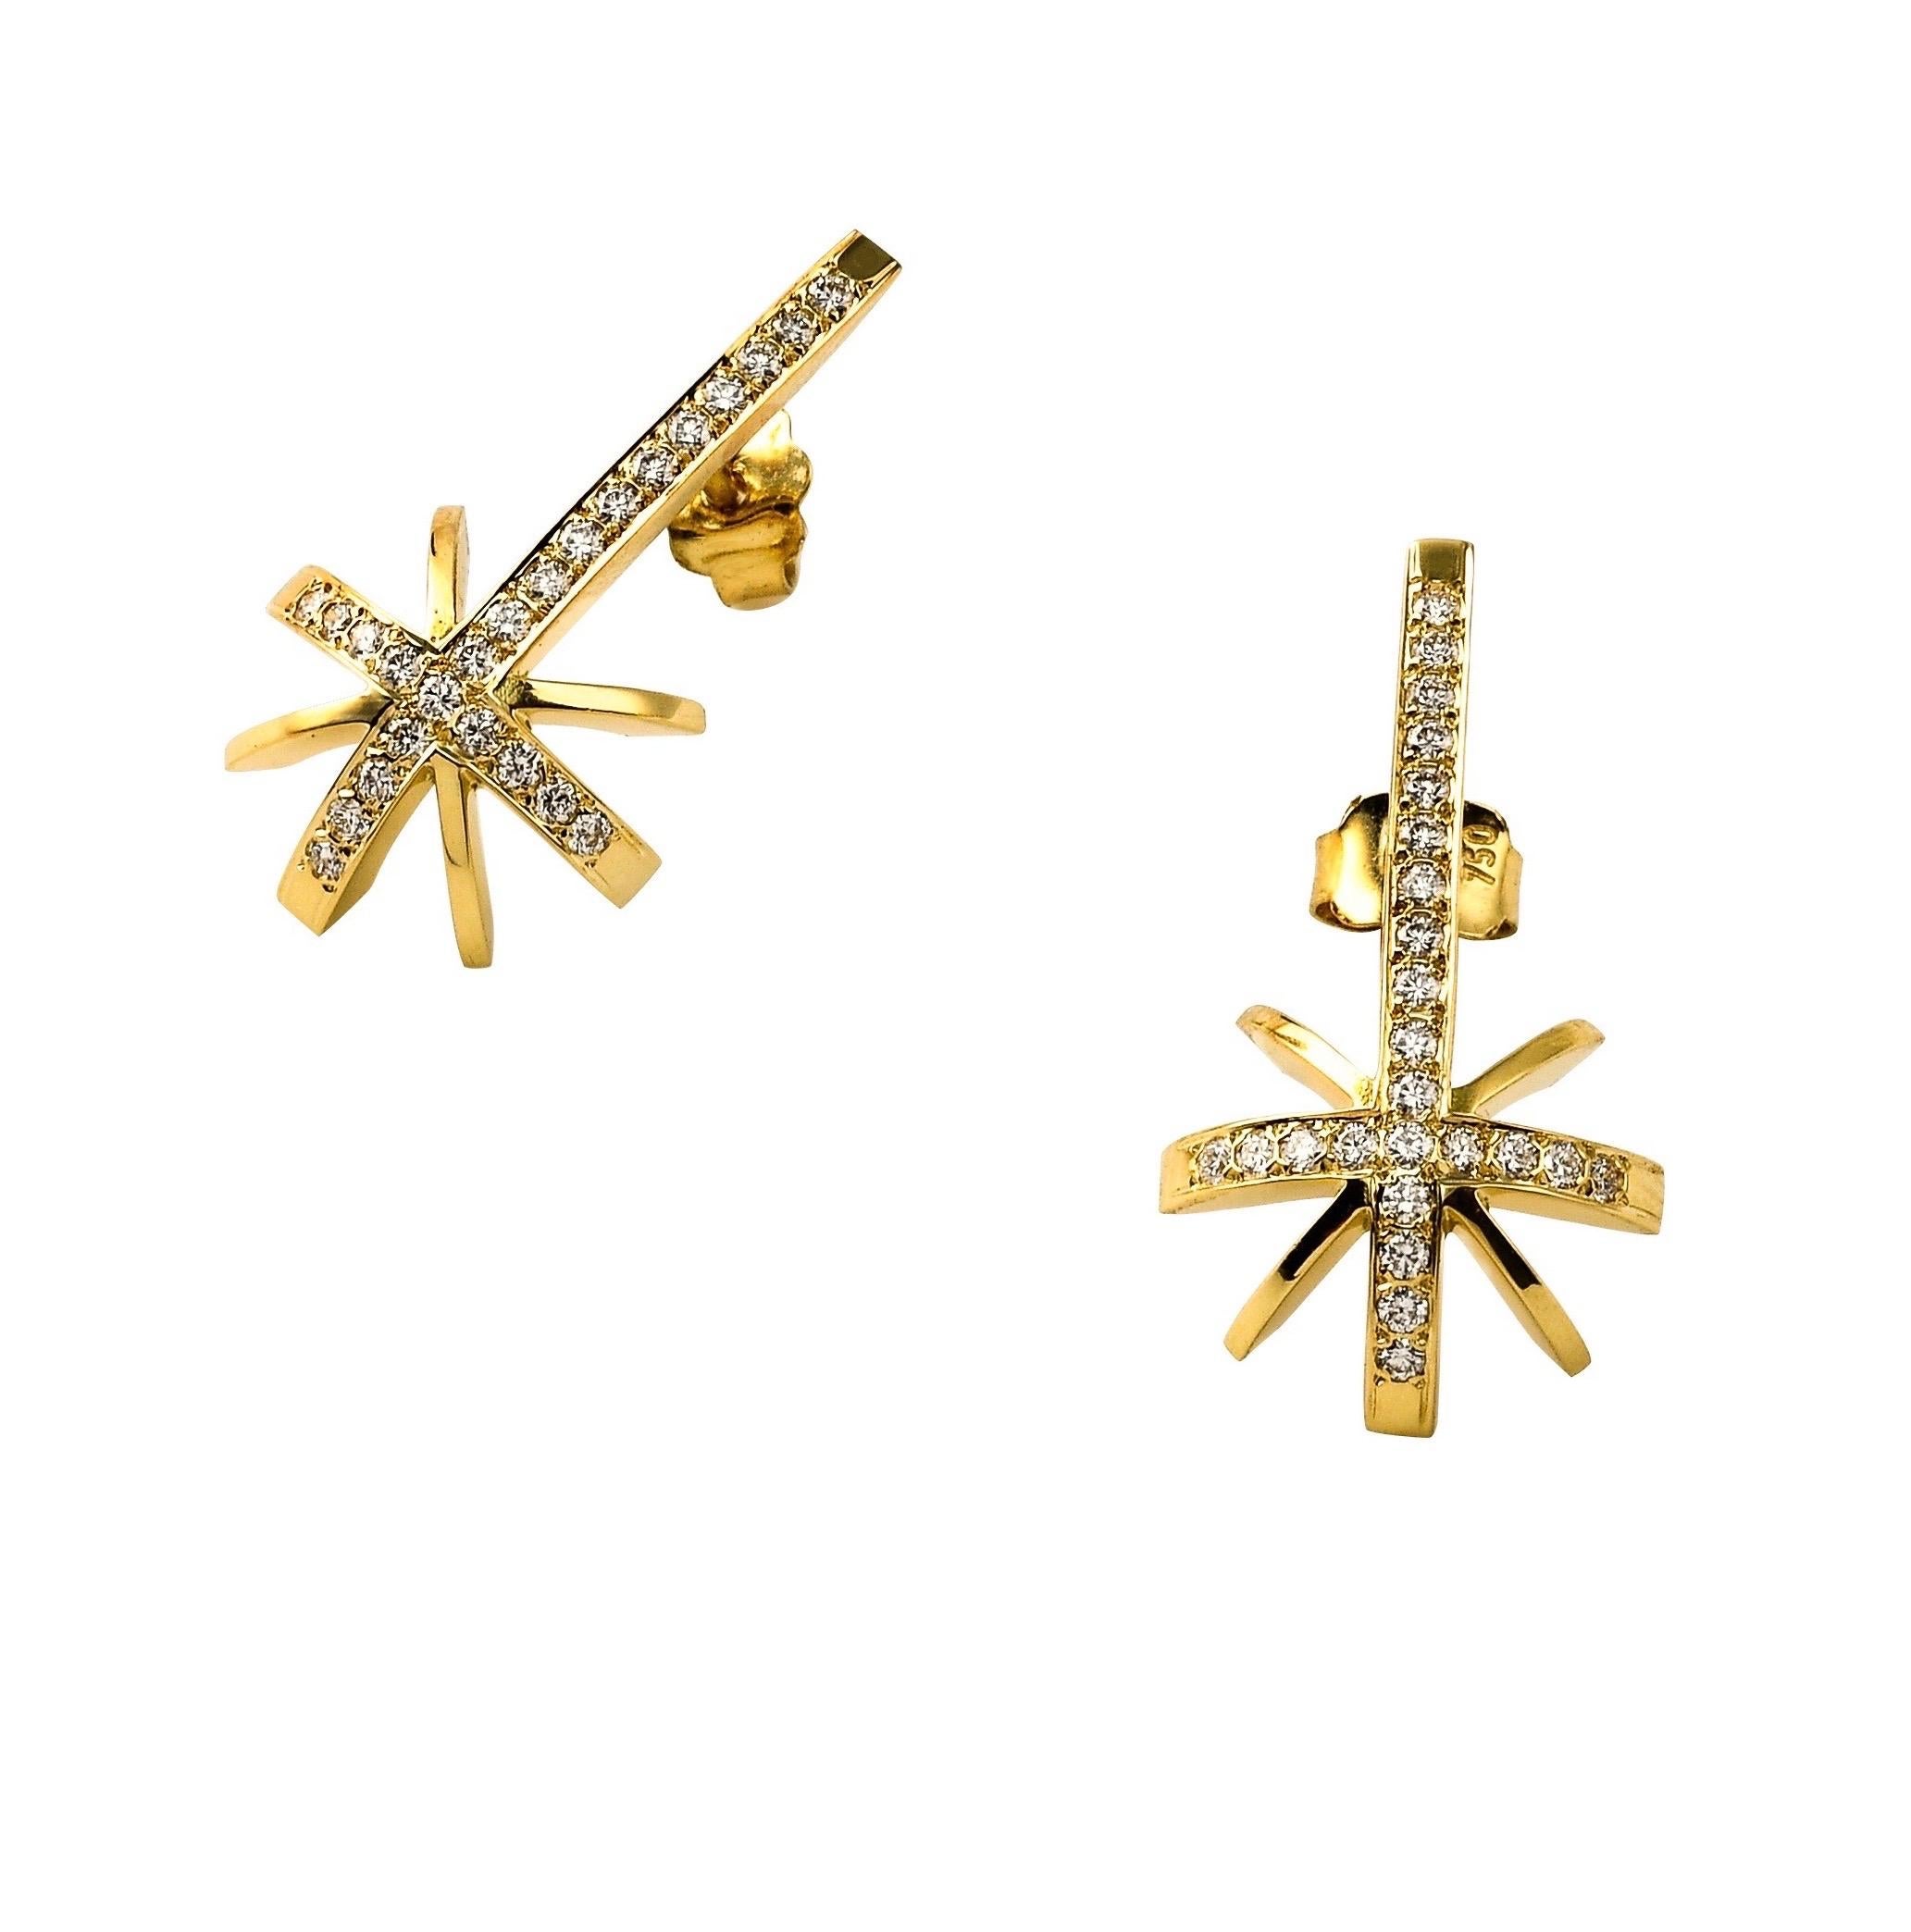 The ‘Shooting Star’, earrings are crafted in 18K yellow gold hallmarked in Cyprus. These impressive sculptural earrings come in a highly polished finish and feature a total of 0,48 Cts white, VS Diamonds. 
The ‘Shooting Star’, earrings are part of